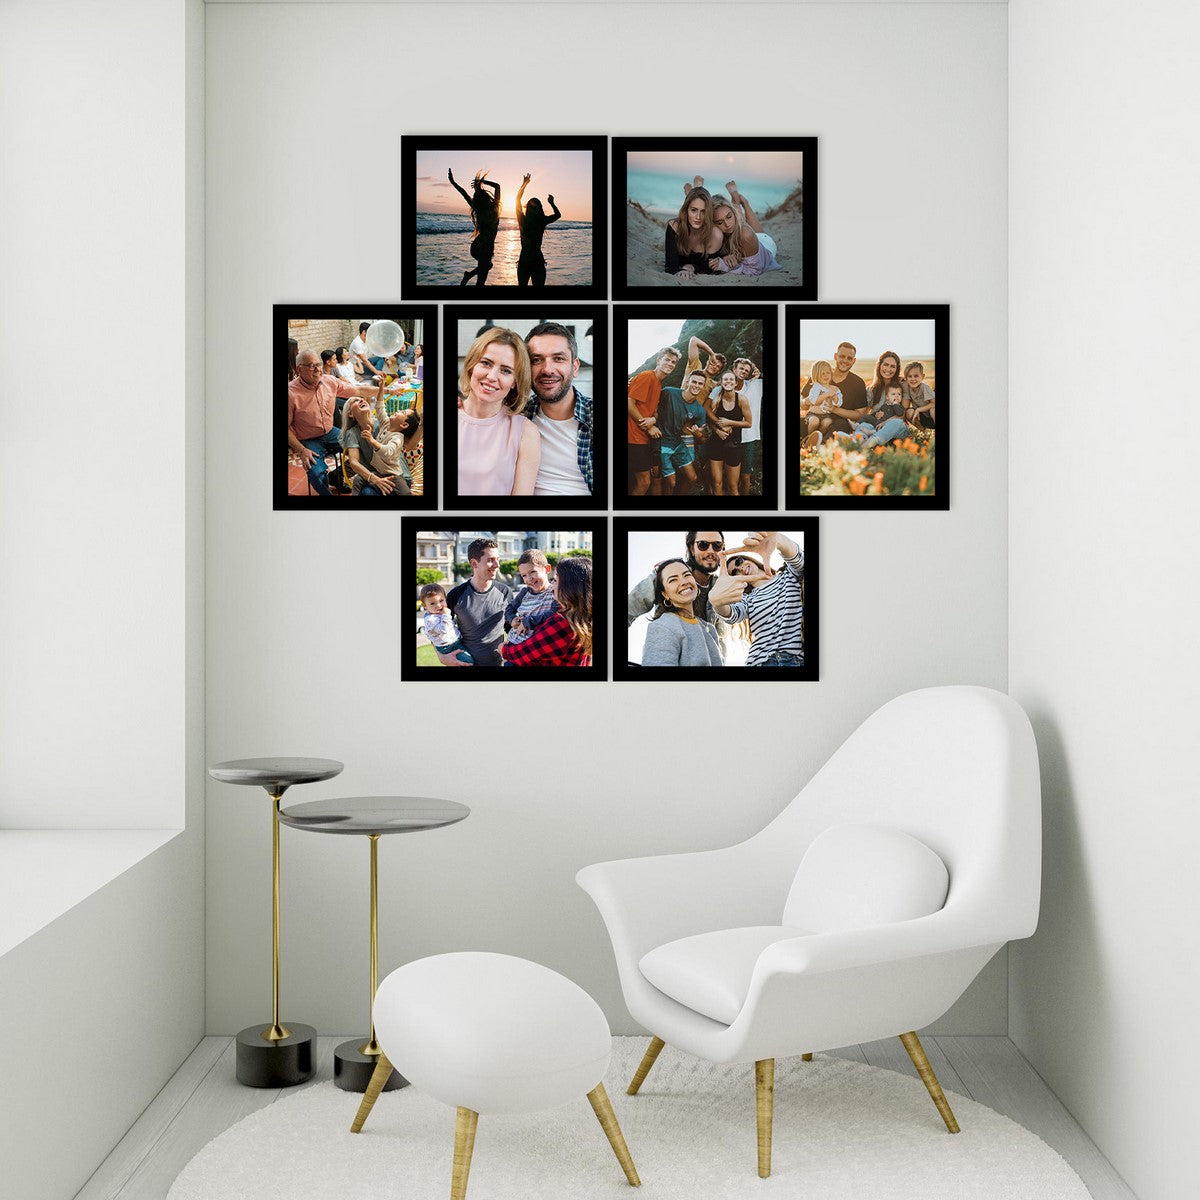 Memory Wall Collage Photo Frame - Set of 8 Photo Frames for 8 Photos of 8"x10" 2